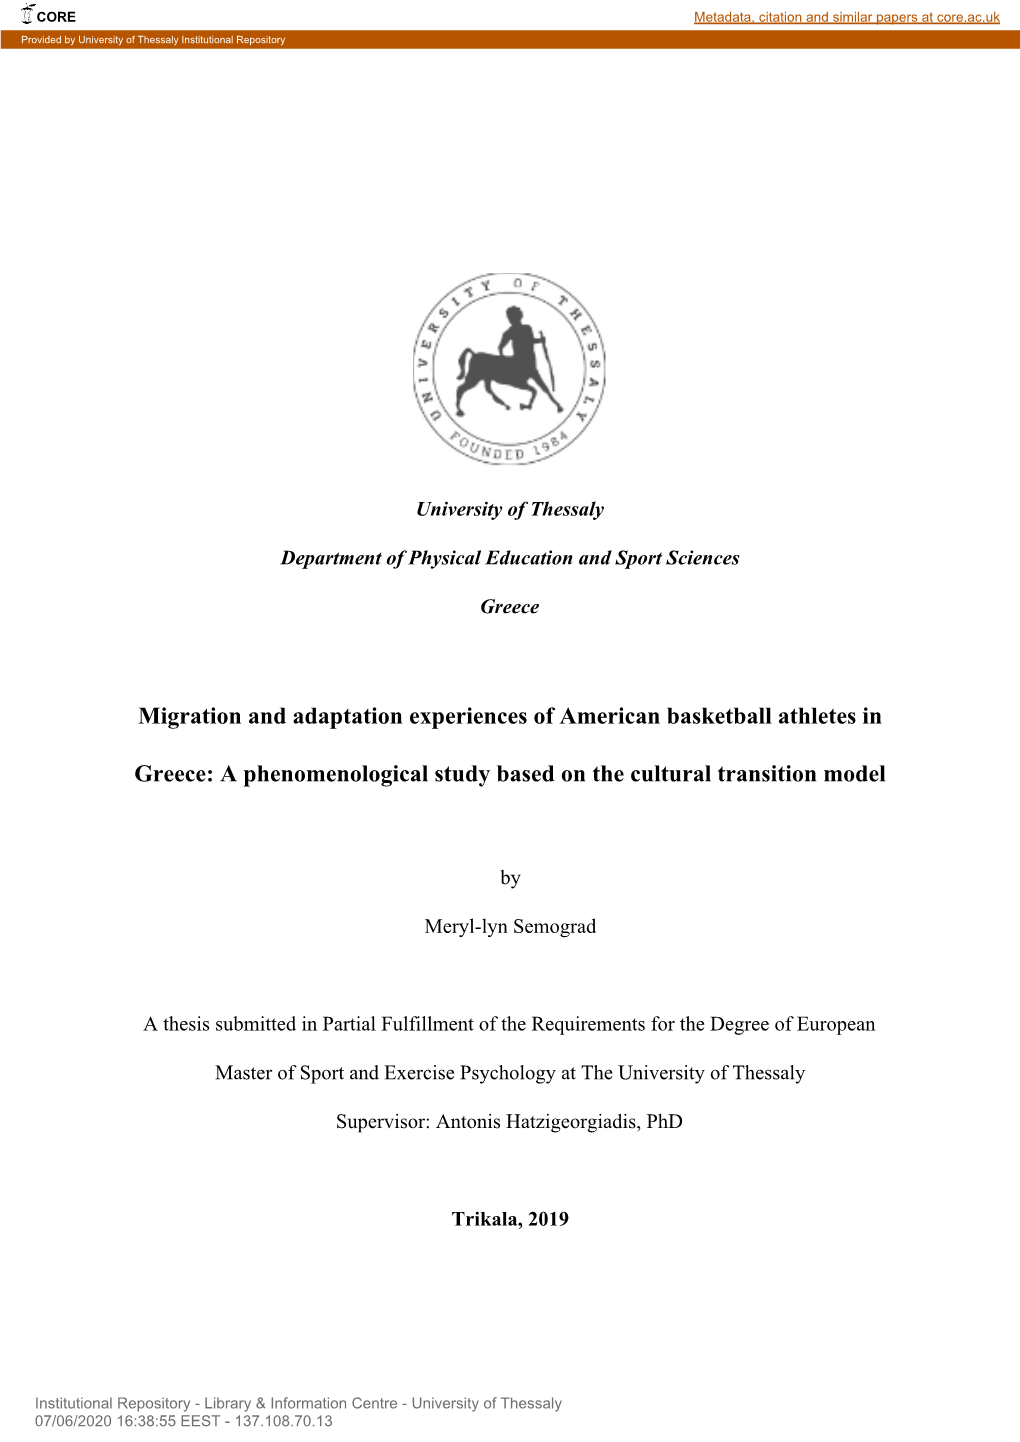 Migration and Adaptation Experiences of American Basketball Athletes in Greece 2